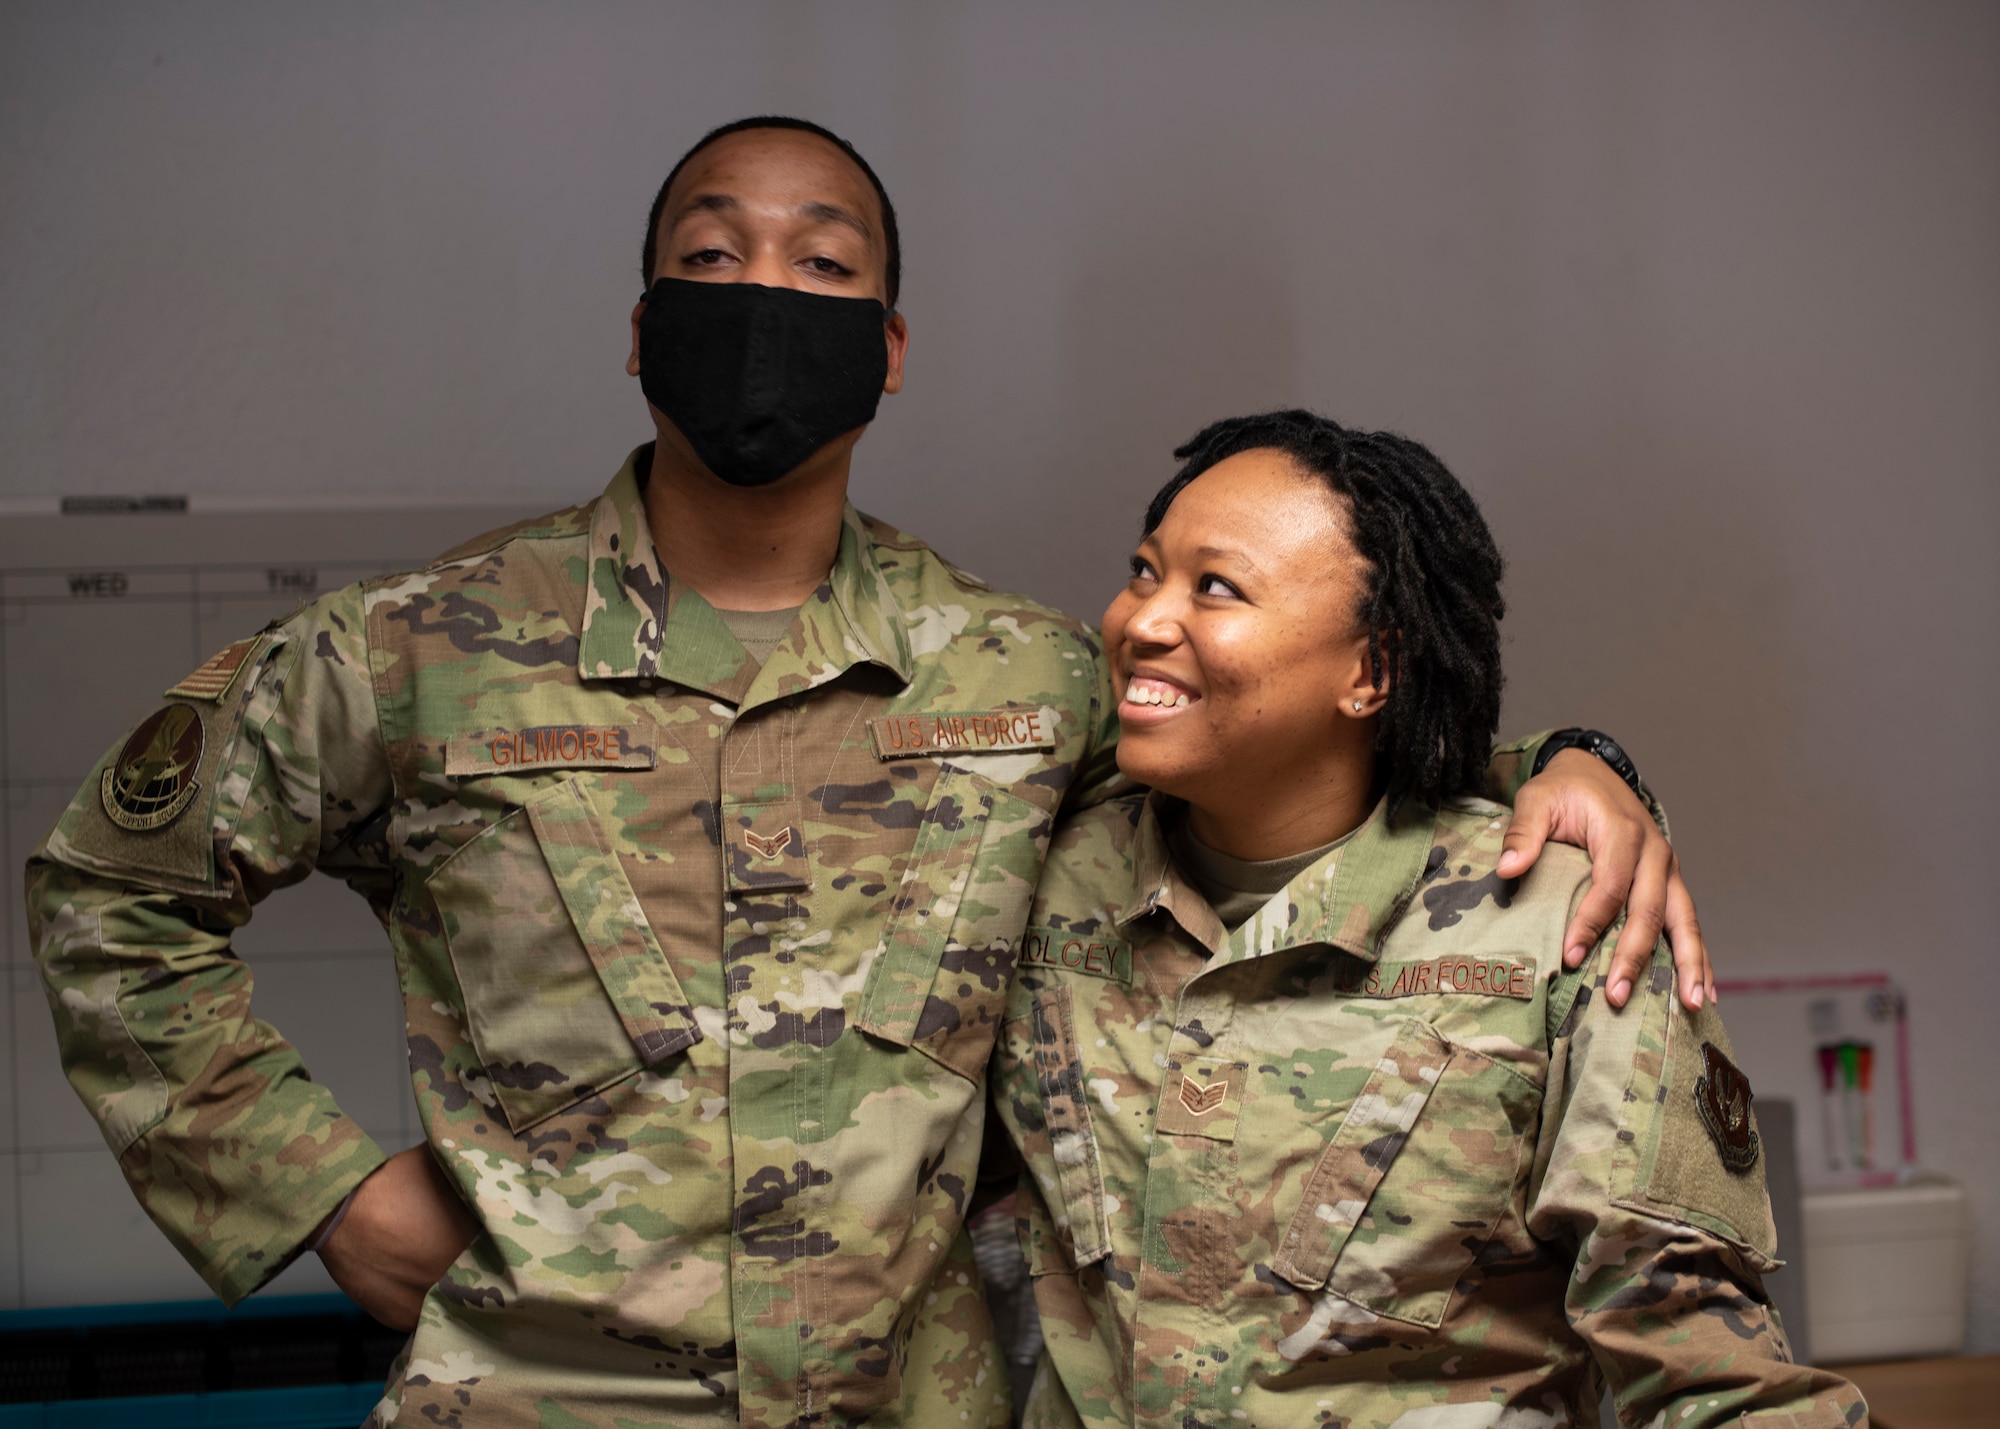 U.S. Air Force Staff Sgt. Jasmine Holcey, right, 786th Force Support Squadron relocations supervisor, poses for a photo with A1C Joshua Gilmore, 786 FSS relocation apprentice, at Ramstein Air Base, Germany, June 1, 2020.